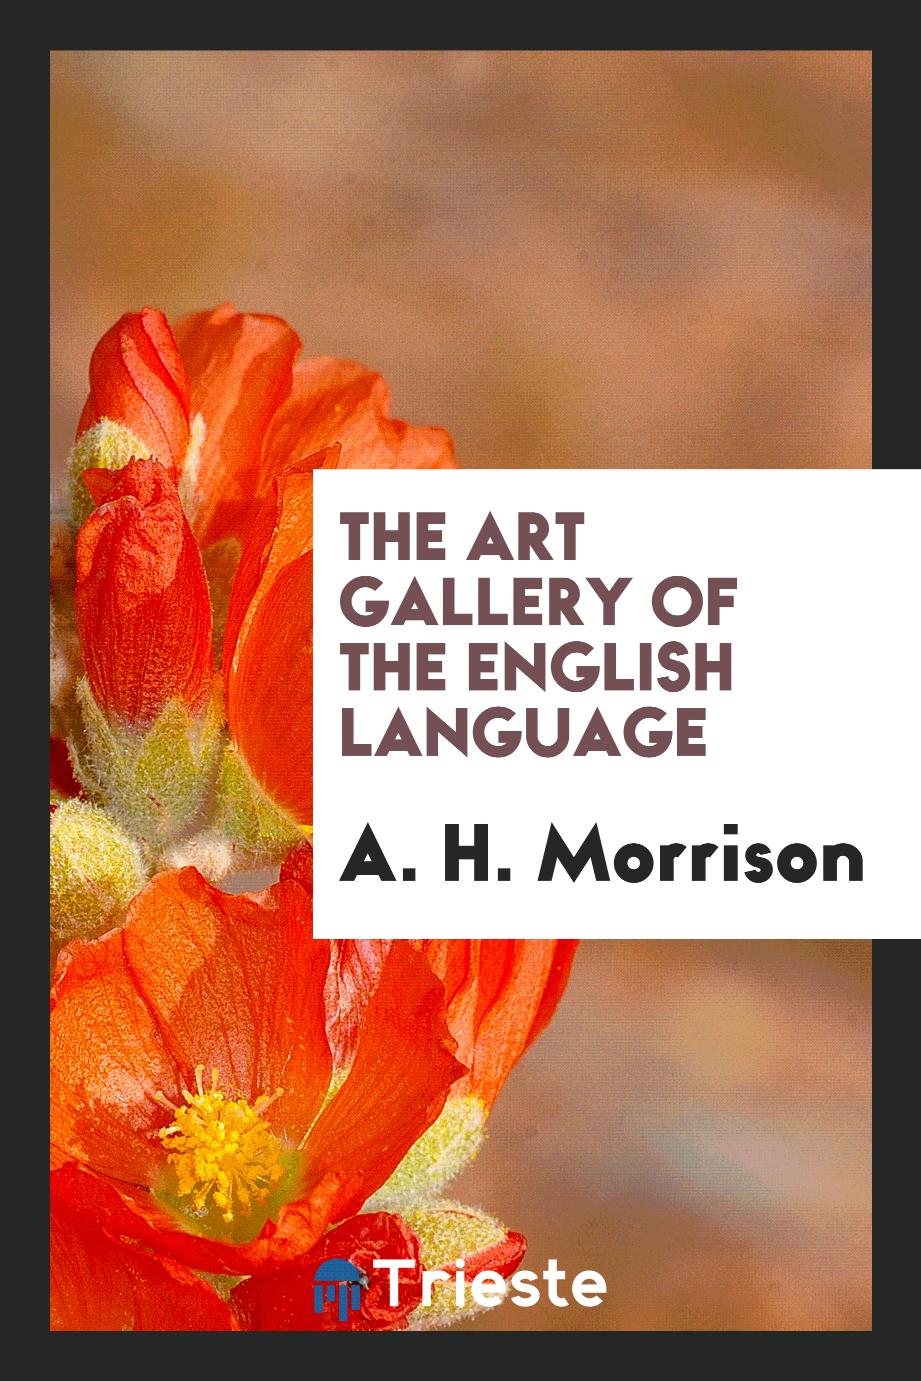 The art gallery of the English language